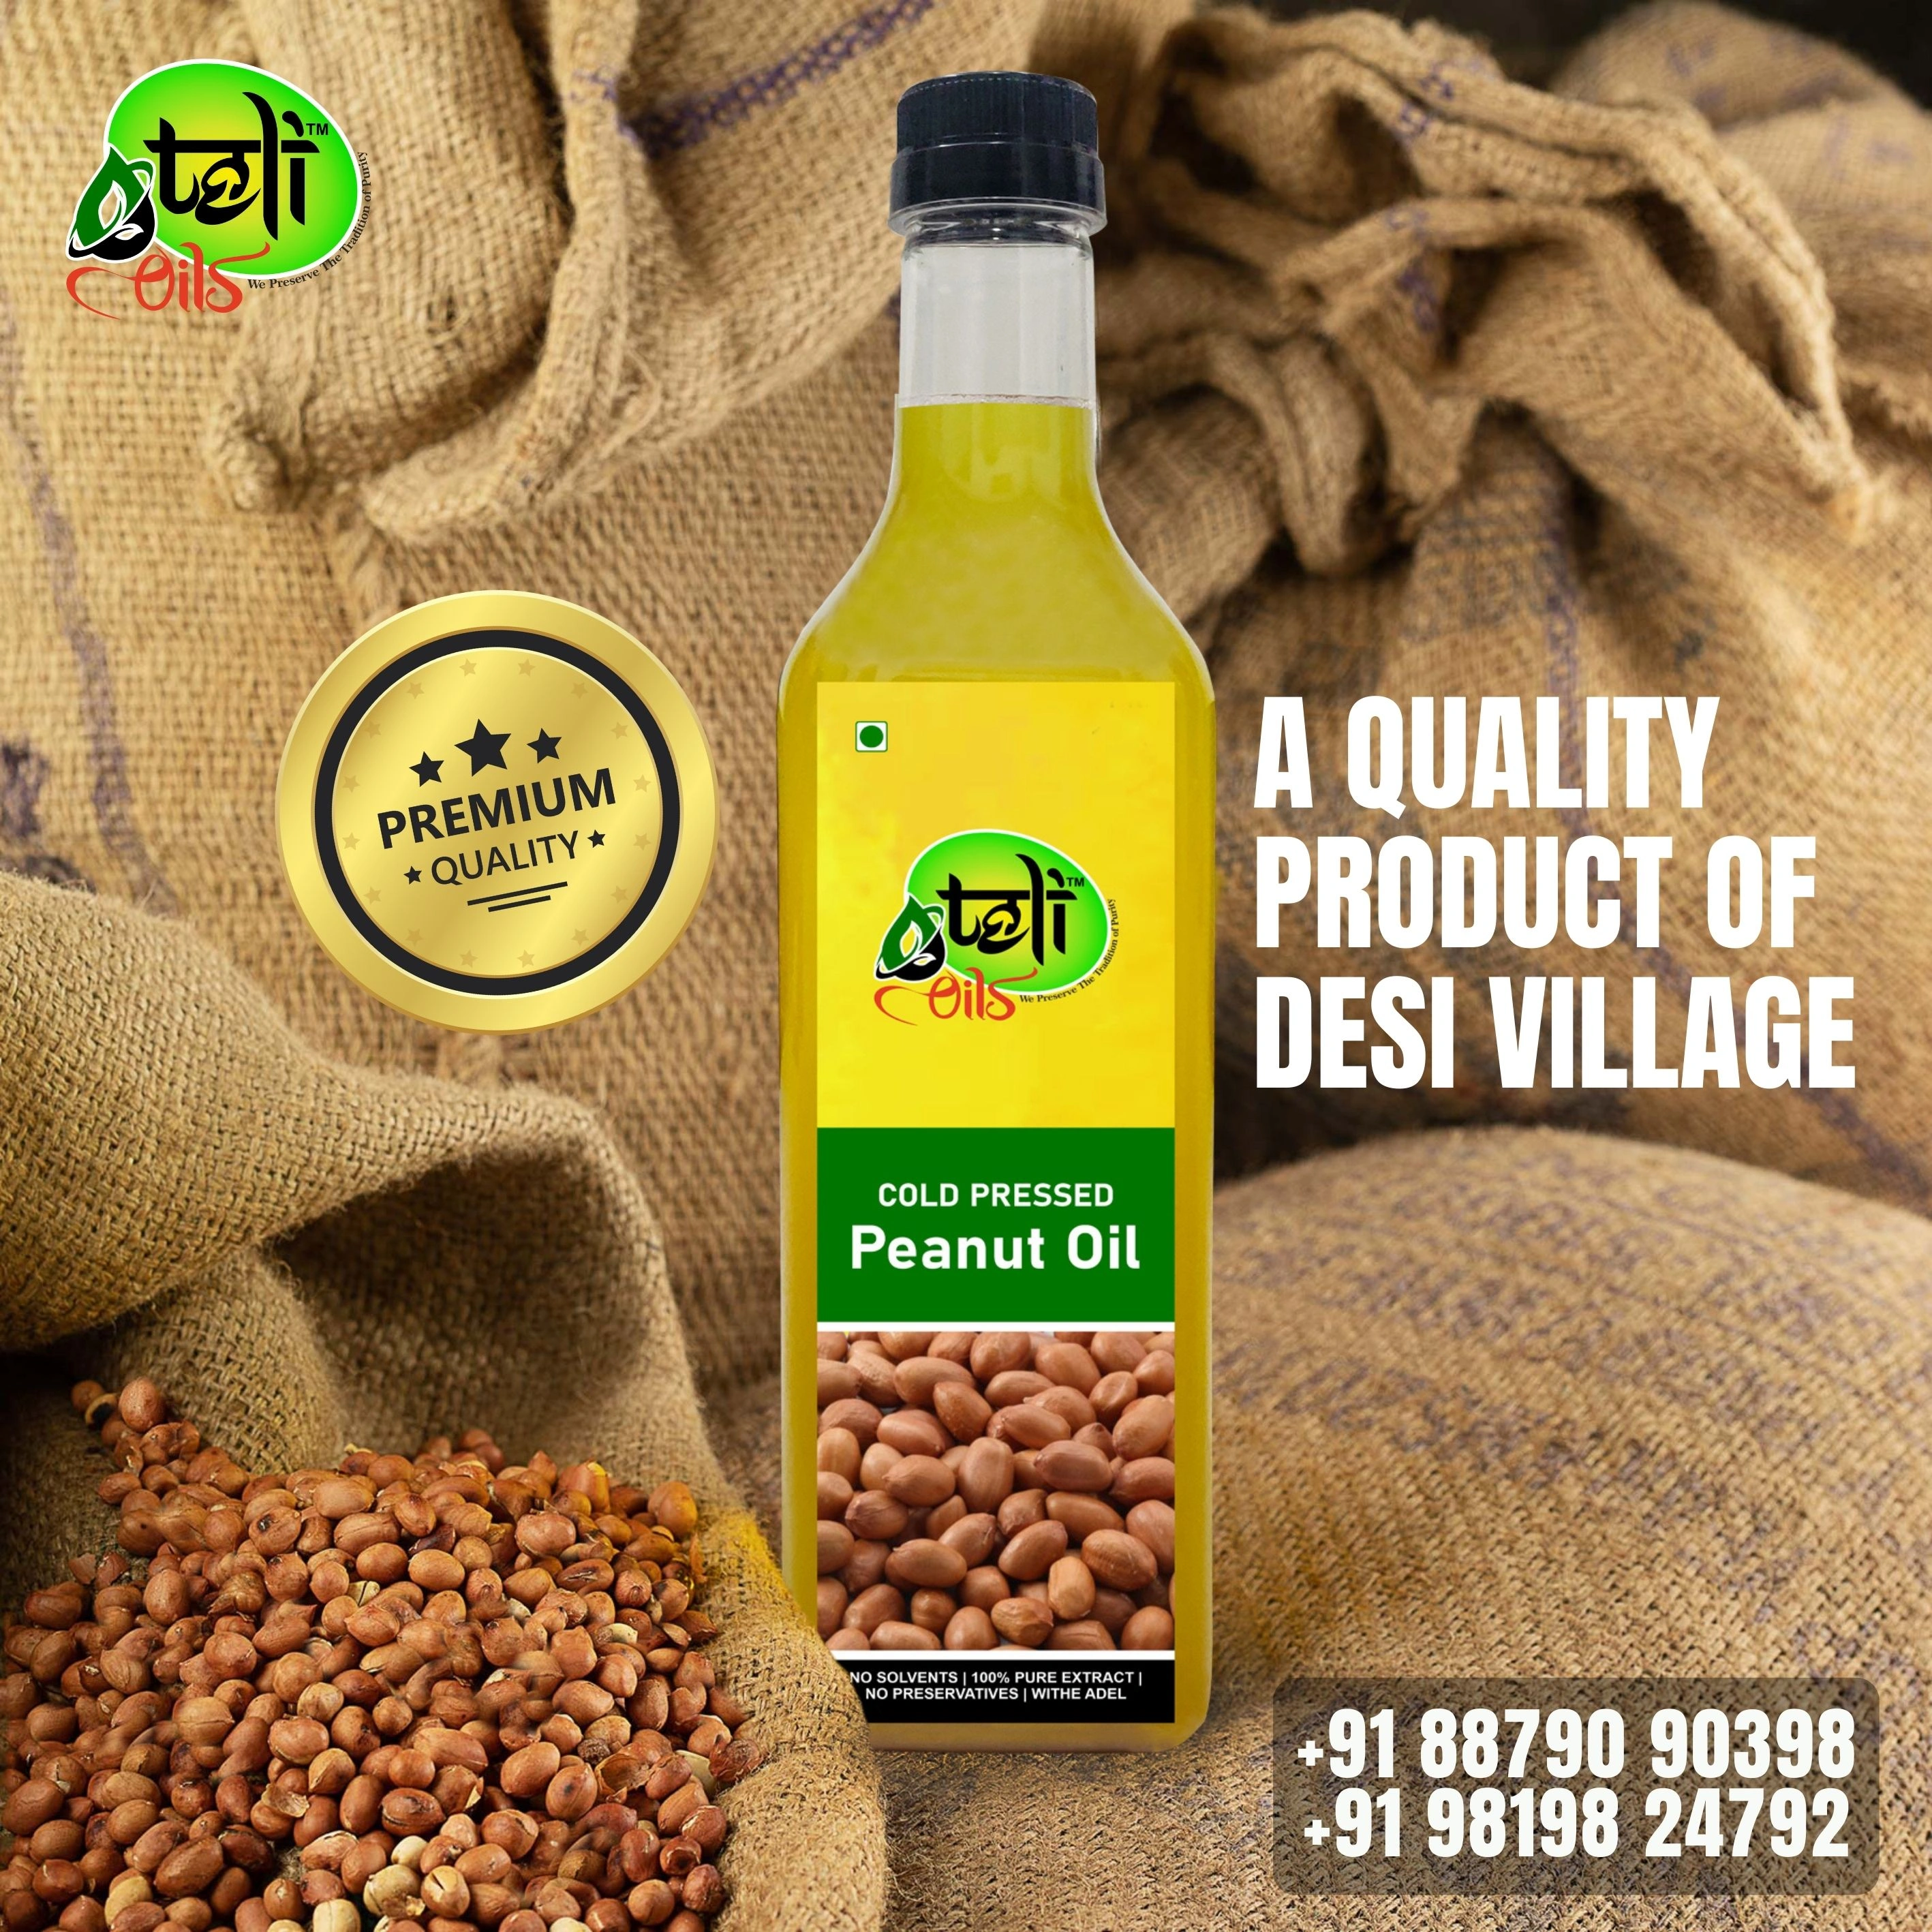 Cold Pressed Groundnut Oil-969485-c4a537f2